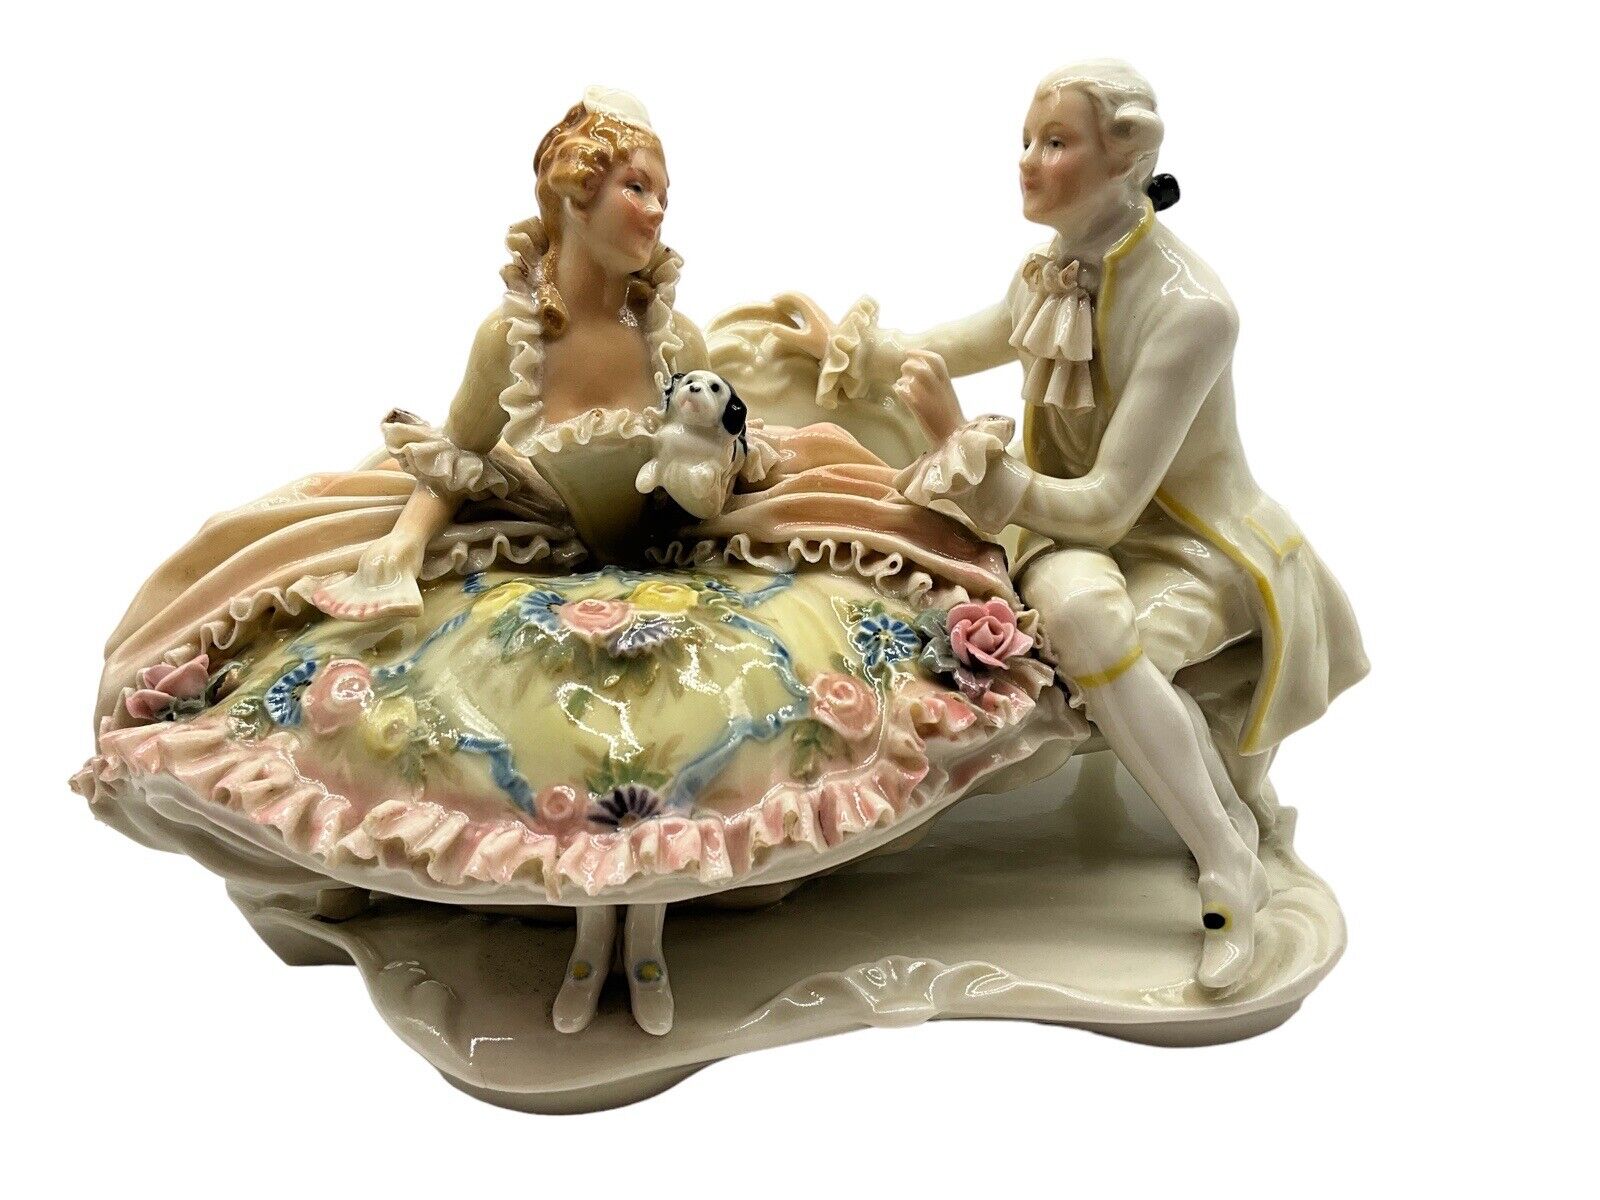 Karl Volkstedt Porcelain Figurine - Courting Couple With Dog - Germany 1920-30